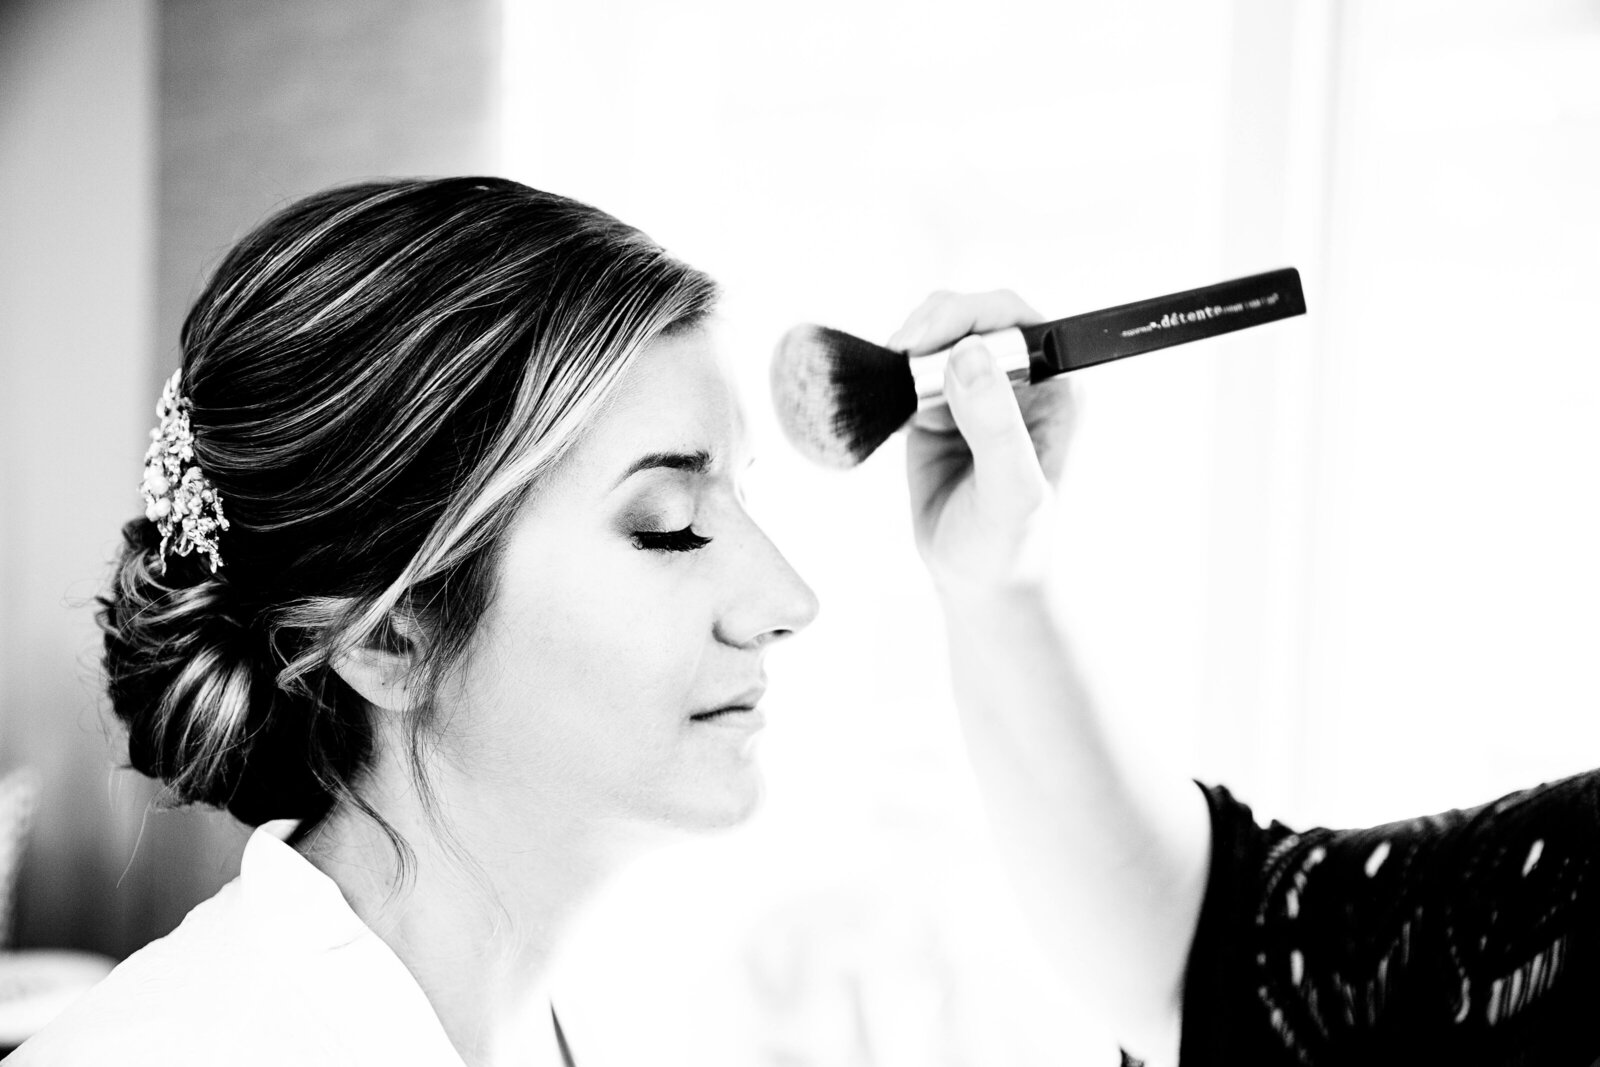 Bridal makeup being applied during getting ready portion of wedding day.